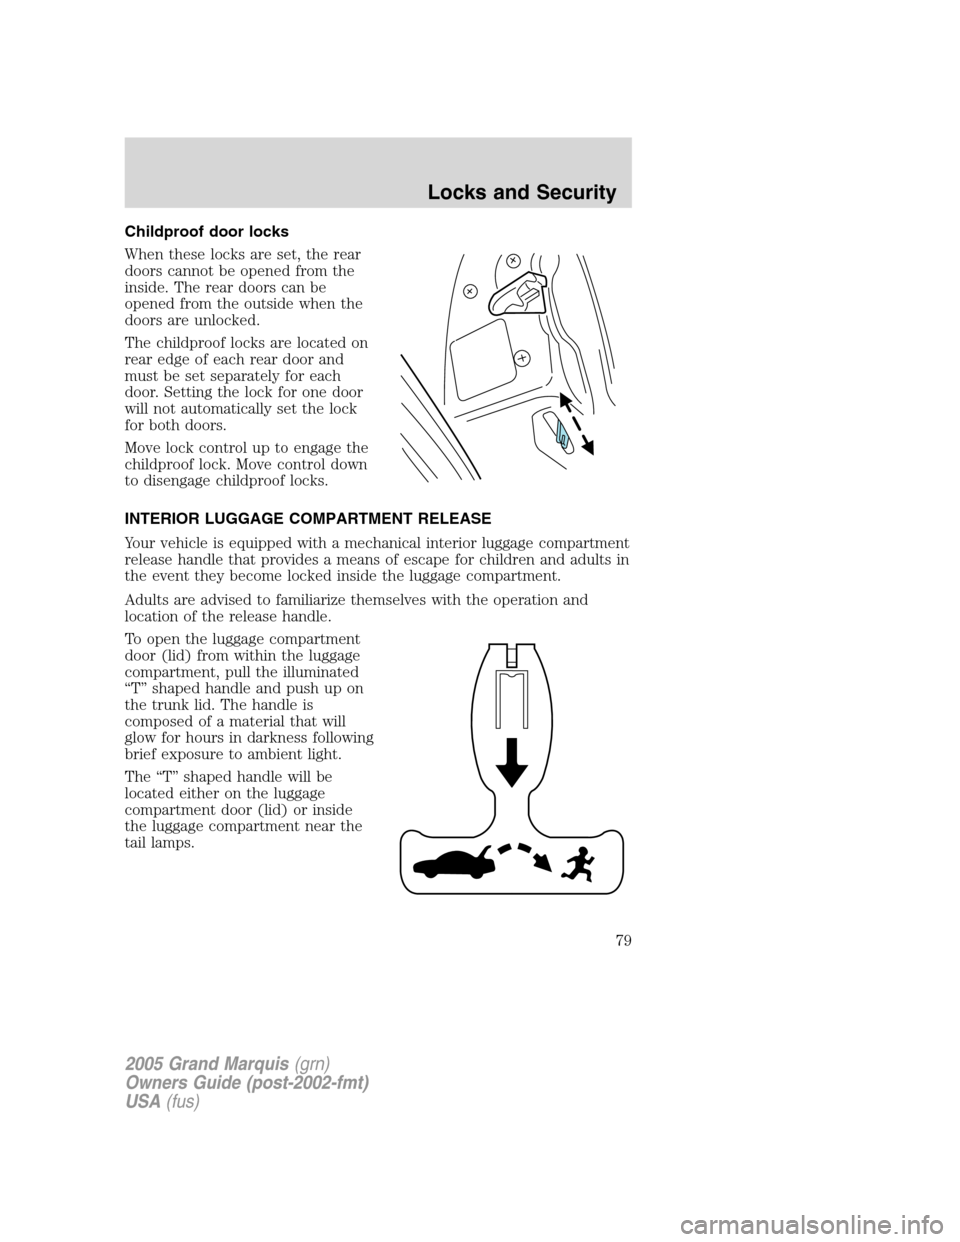 Mercury Grand Marquis 2005  s Manual PDF Childproof door locks
When these locks are set, the rear
doors cannot be opened from the
inside. The rear doors can be
opened from the outside when the
doors are unlocked.
The childproof locks are loc